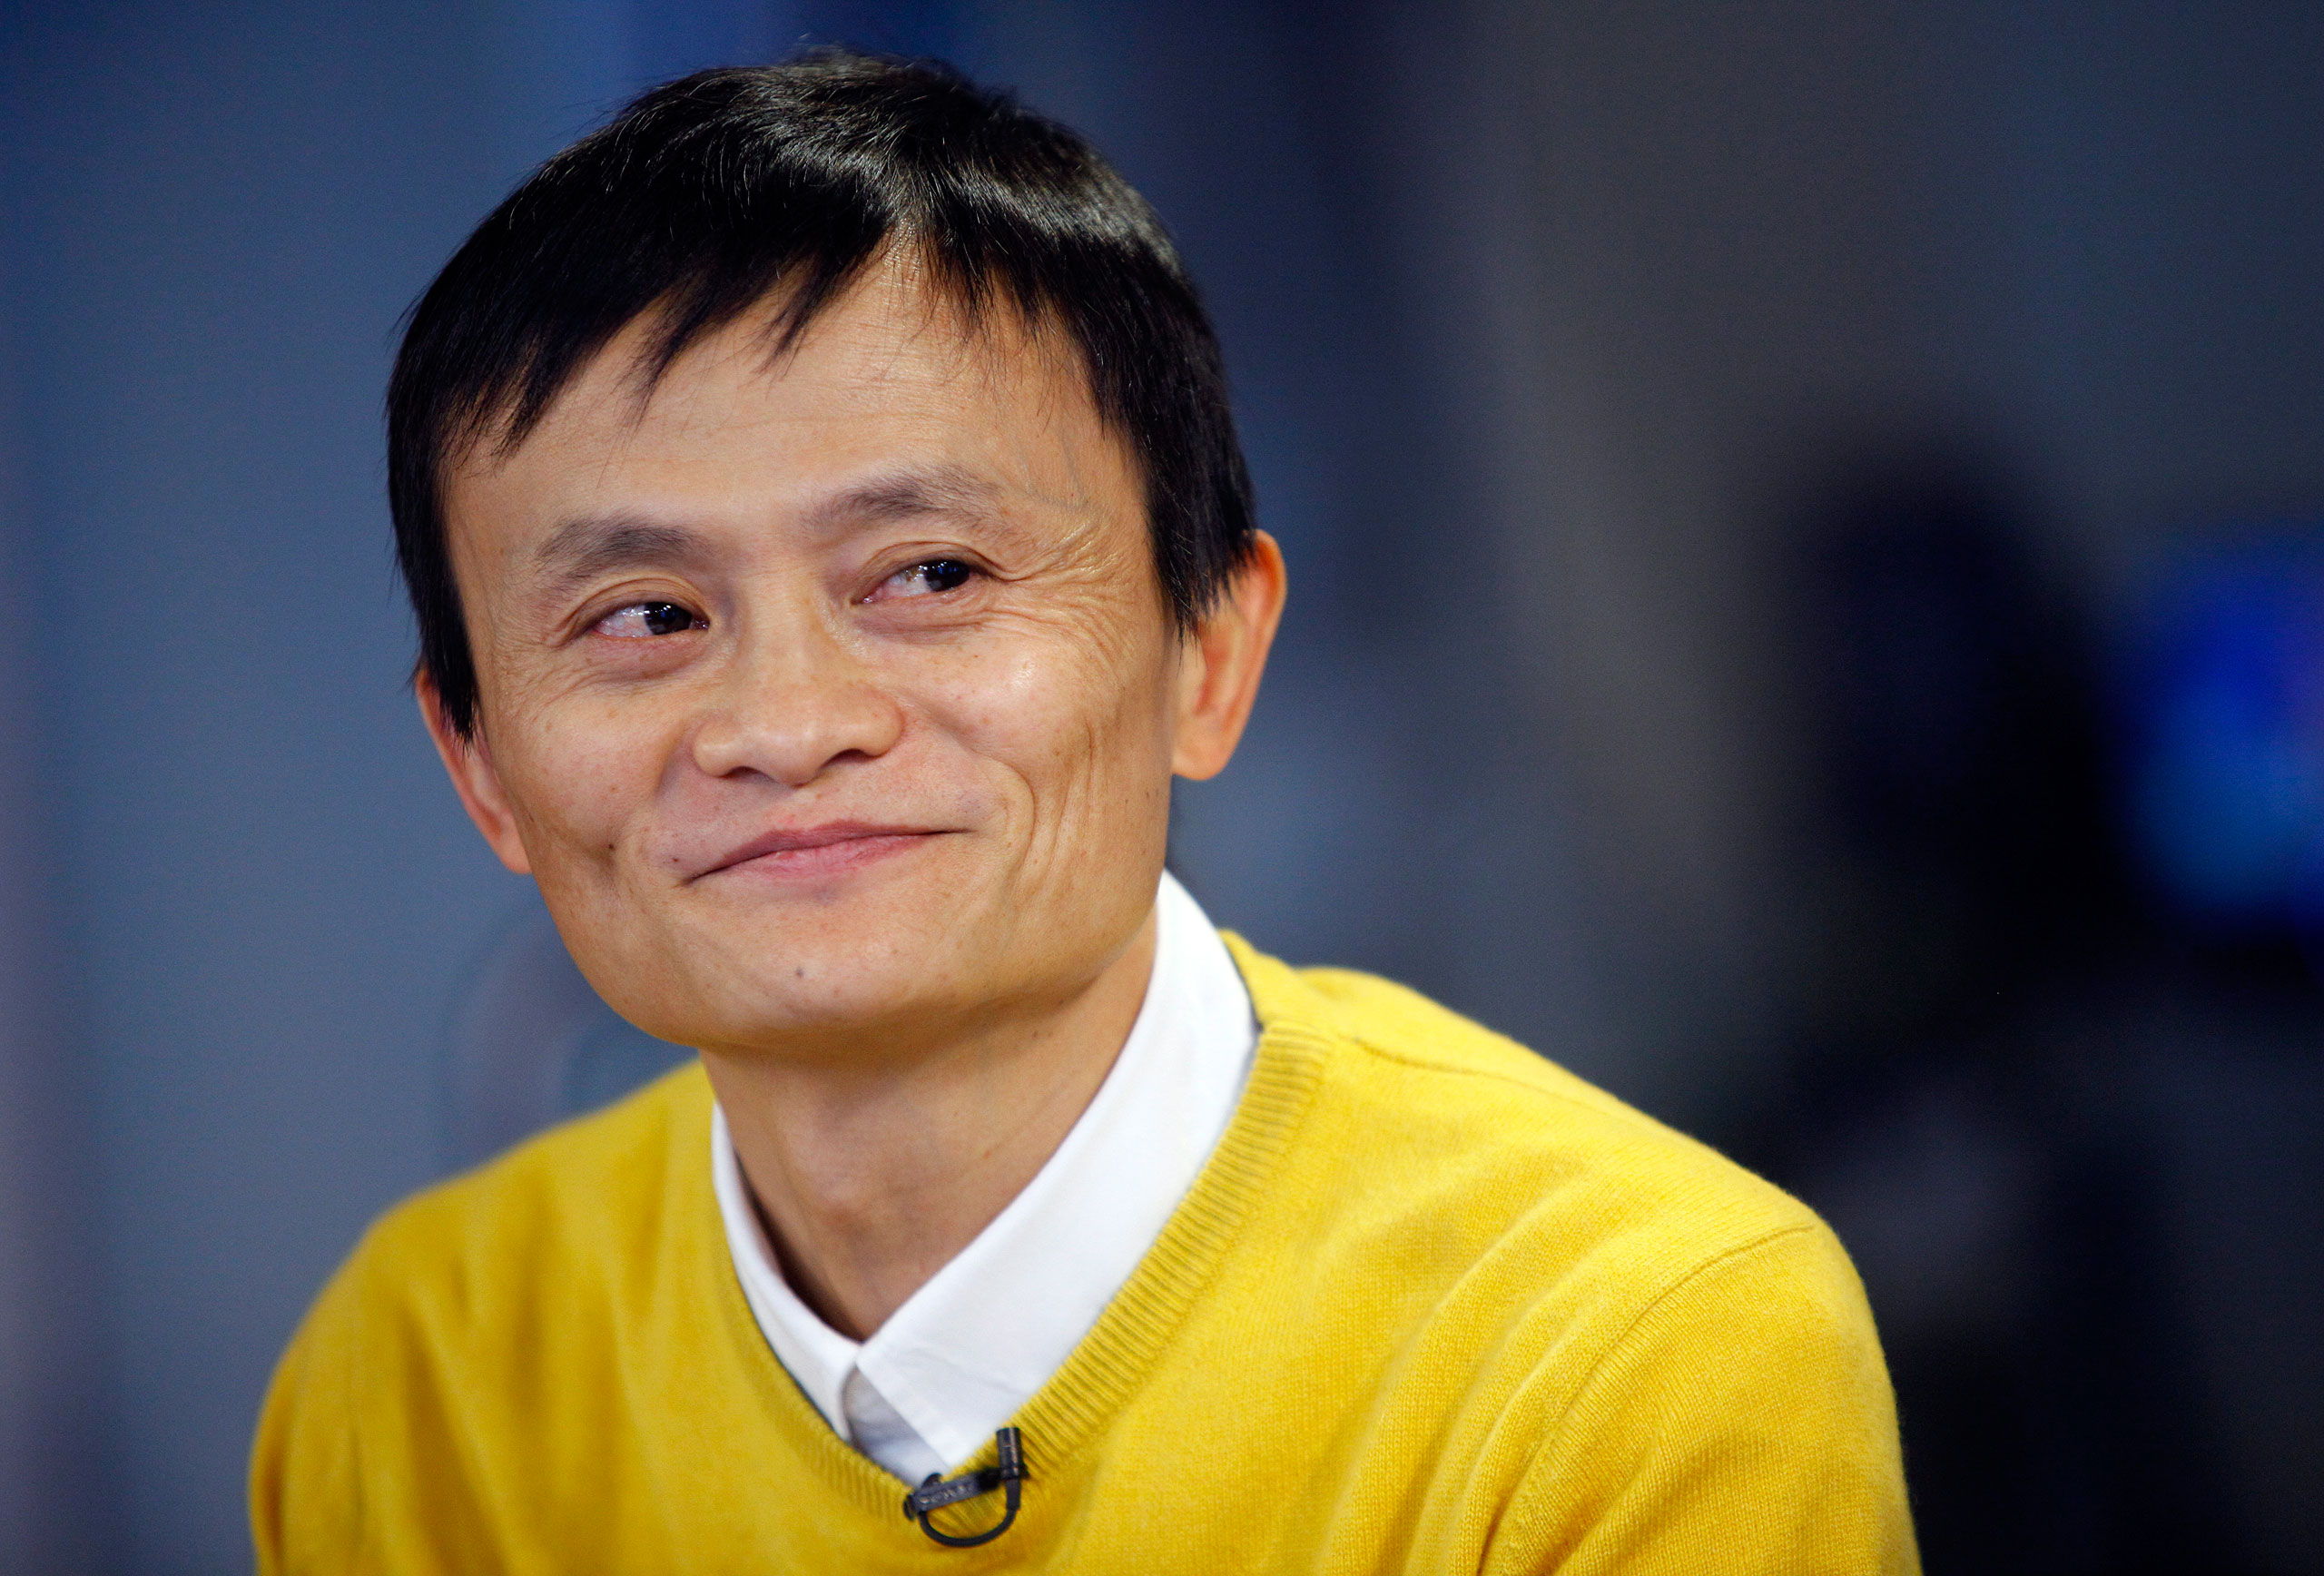 Alibaba CEO Jack Ma during an interview in New York City on March 12, 2009 (Chip East—Reuters)